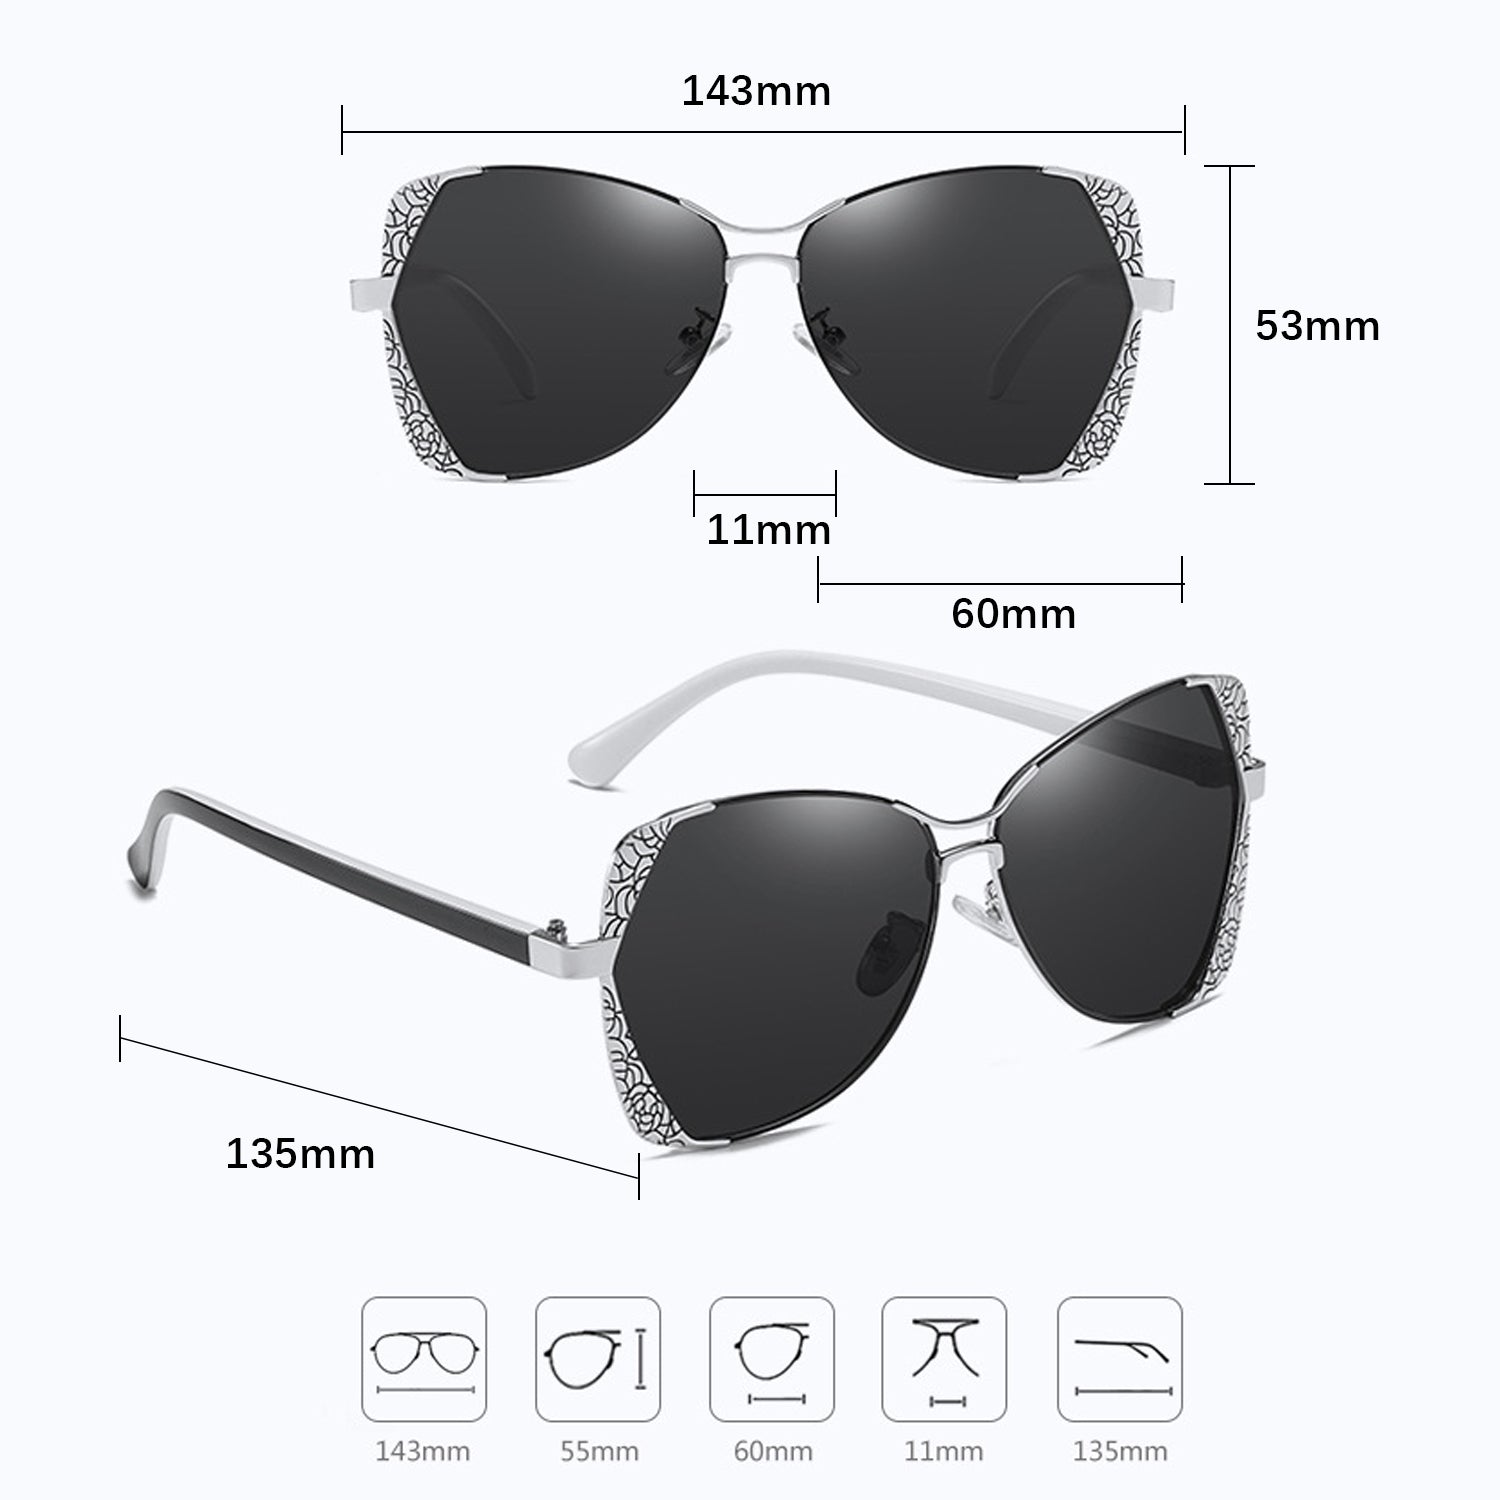 NALANDA Black Women's Polarized Aviator Sunglasses with Carving Pattern UV400 HD Lens Metal PC Frame Glasses For Outdoor Travel Driving Daily Use